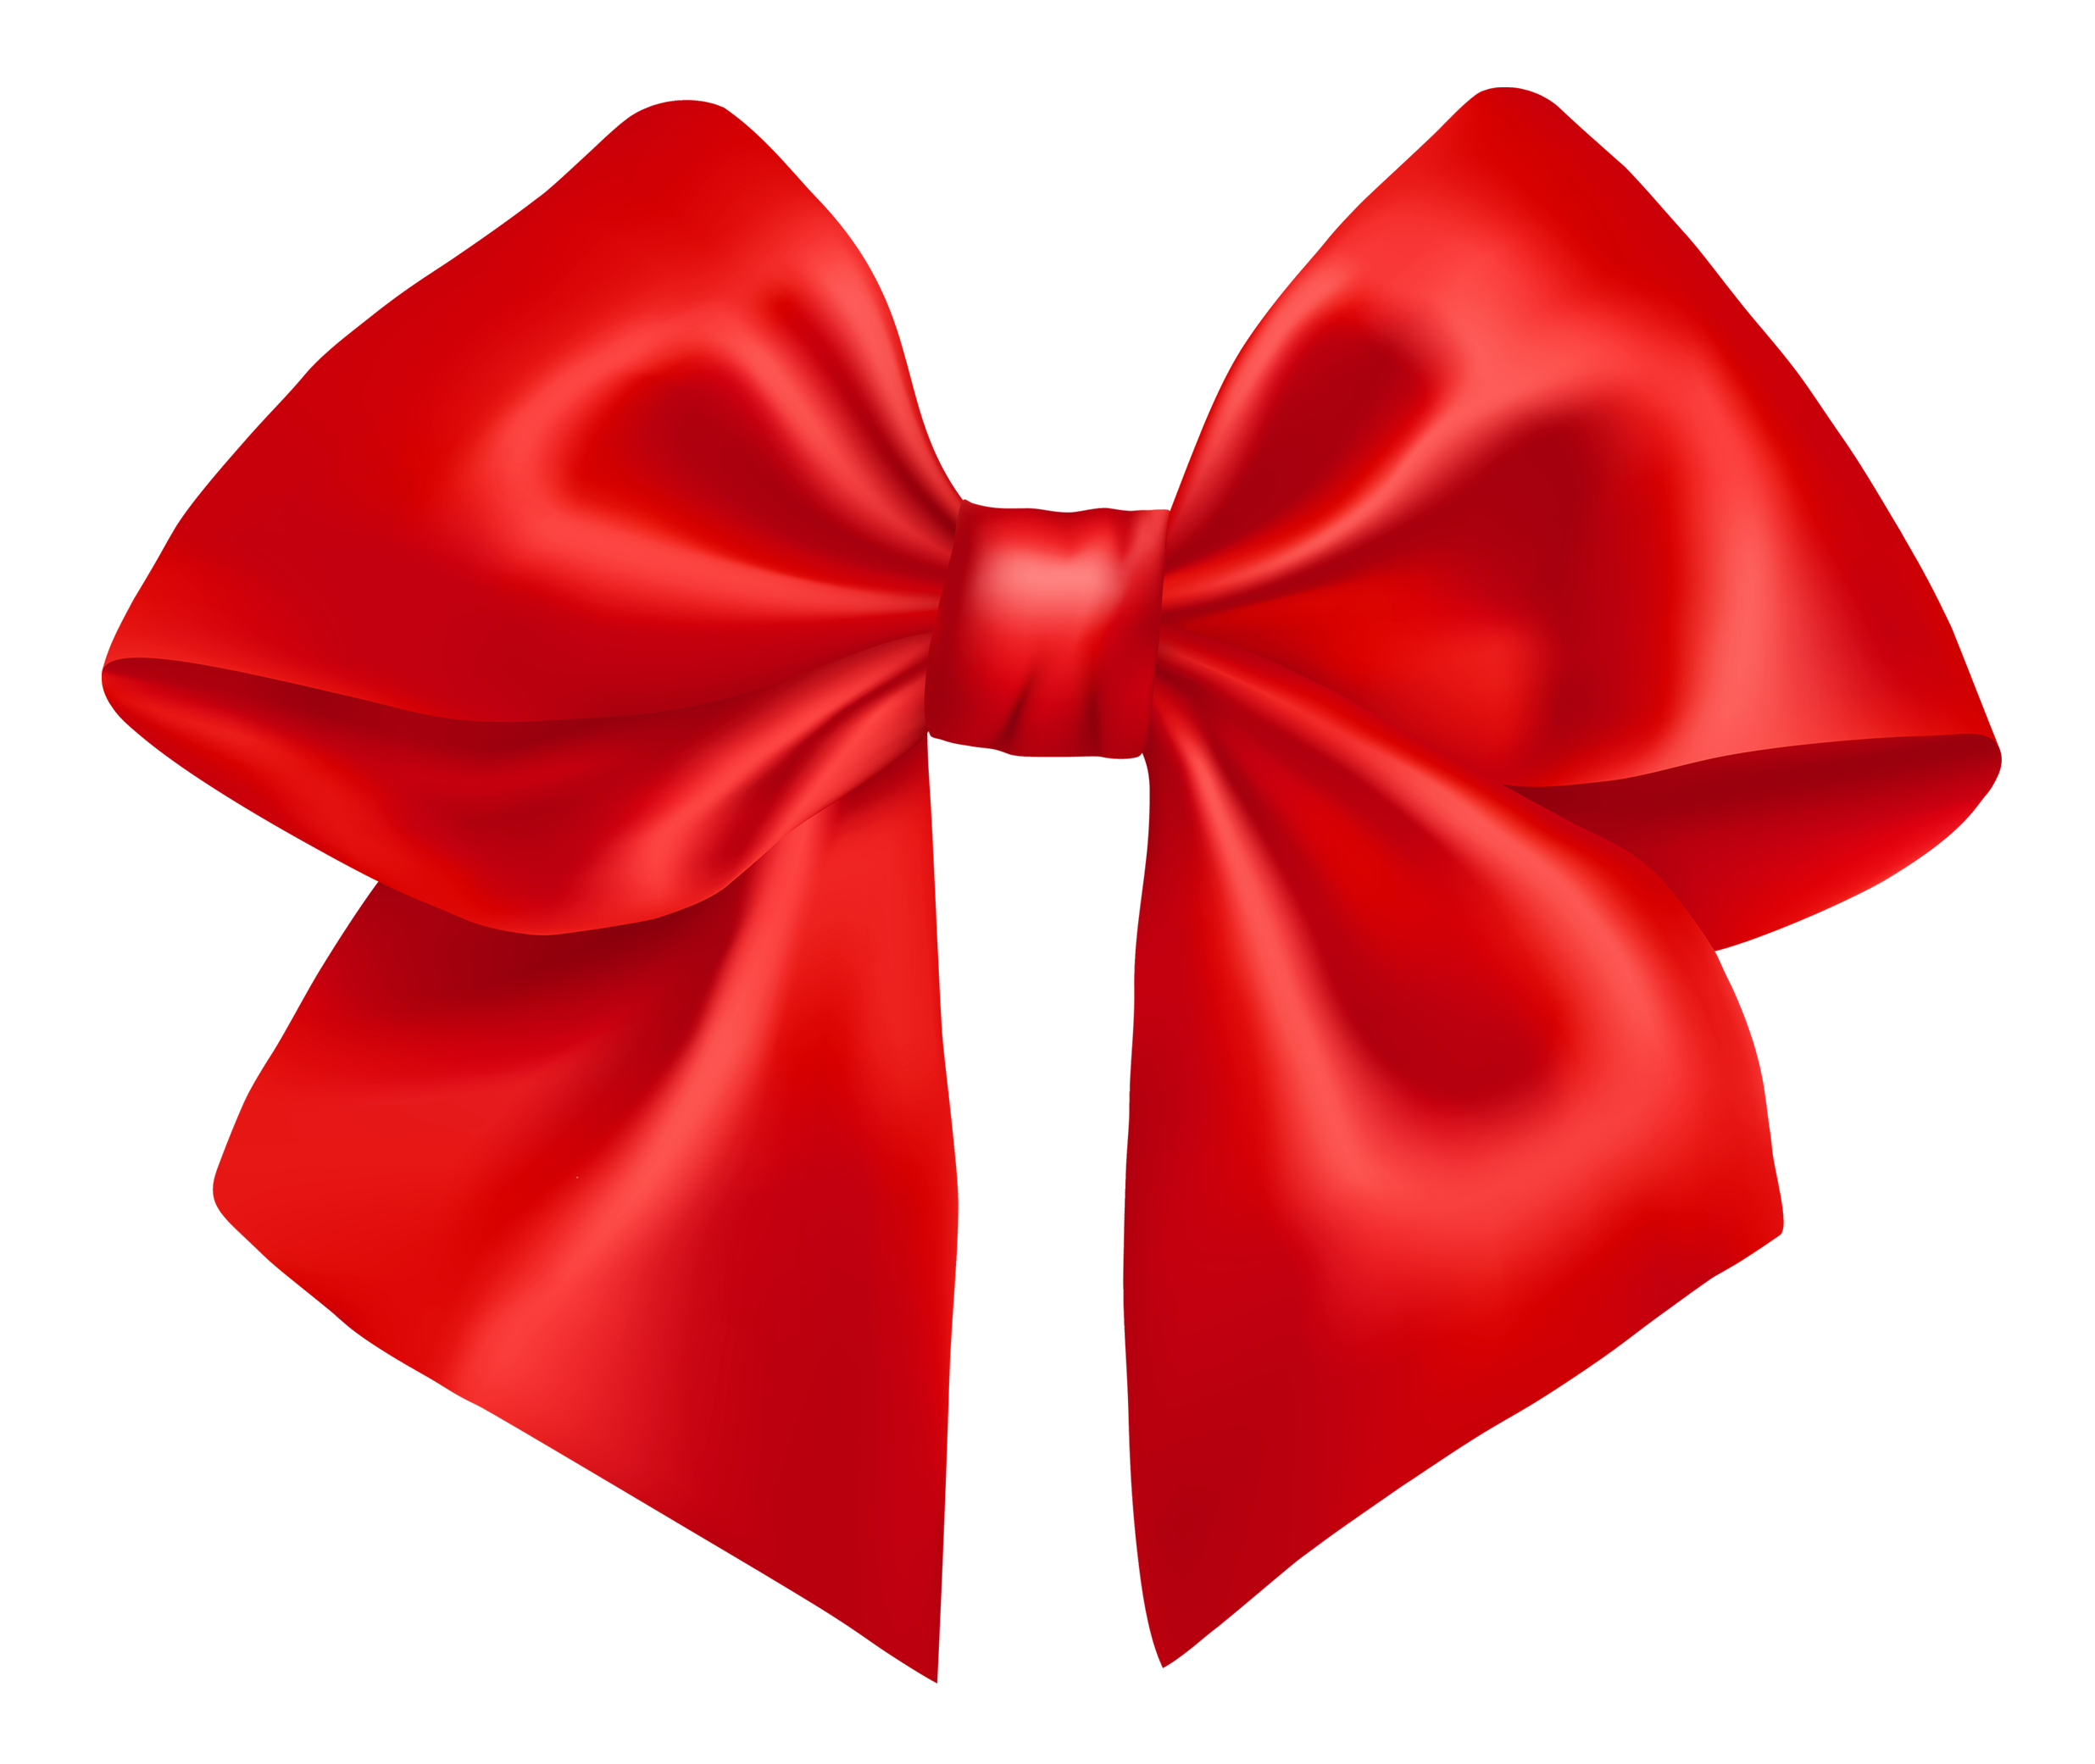 Bow tie red christmas Transpa